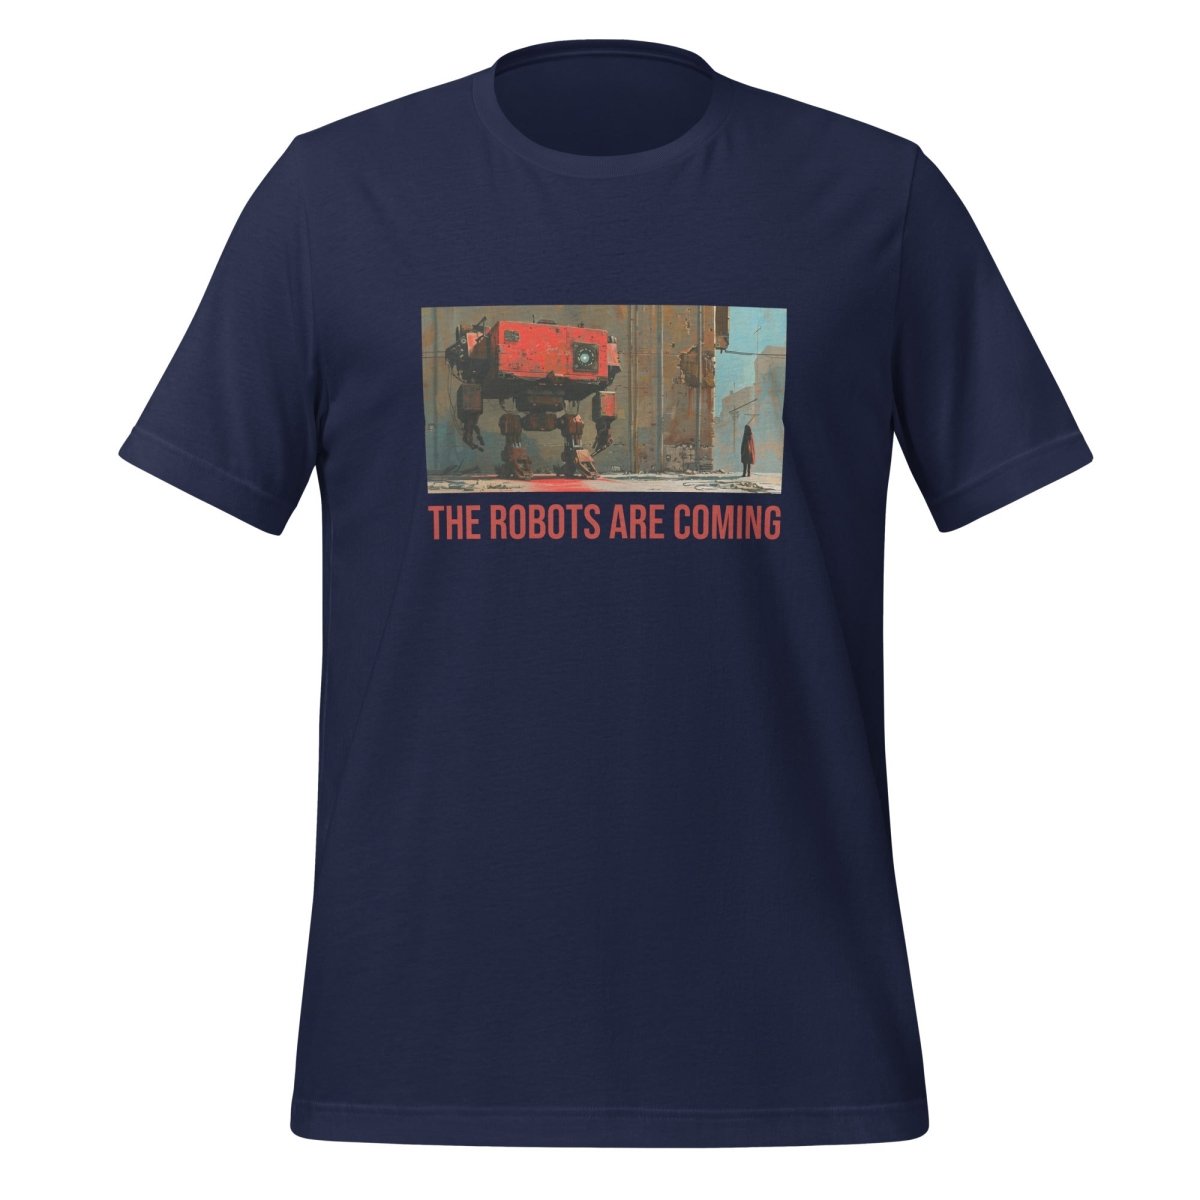 Illustrated The Robots Are Coming T - Shirt (unisex) - Navy - AI Store